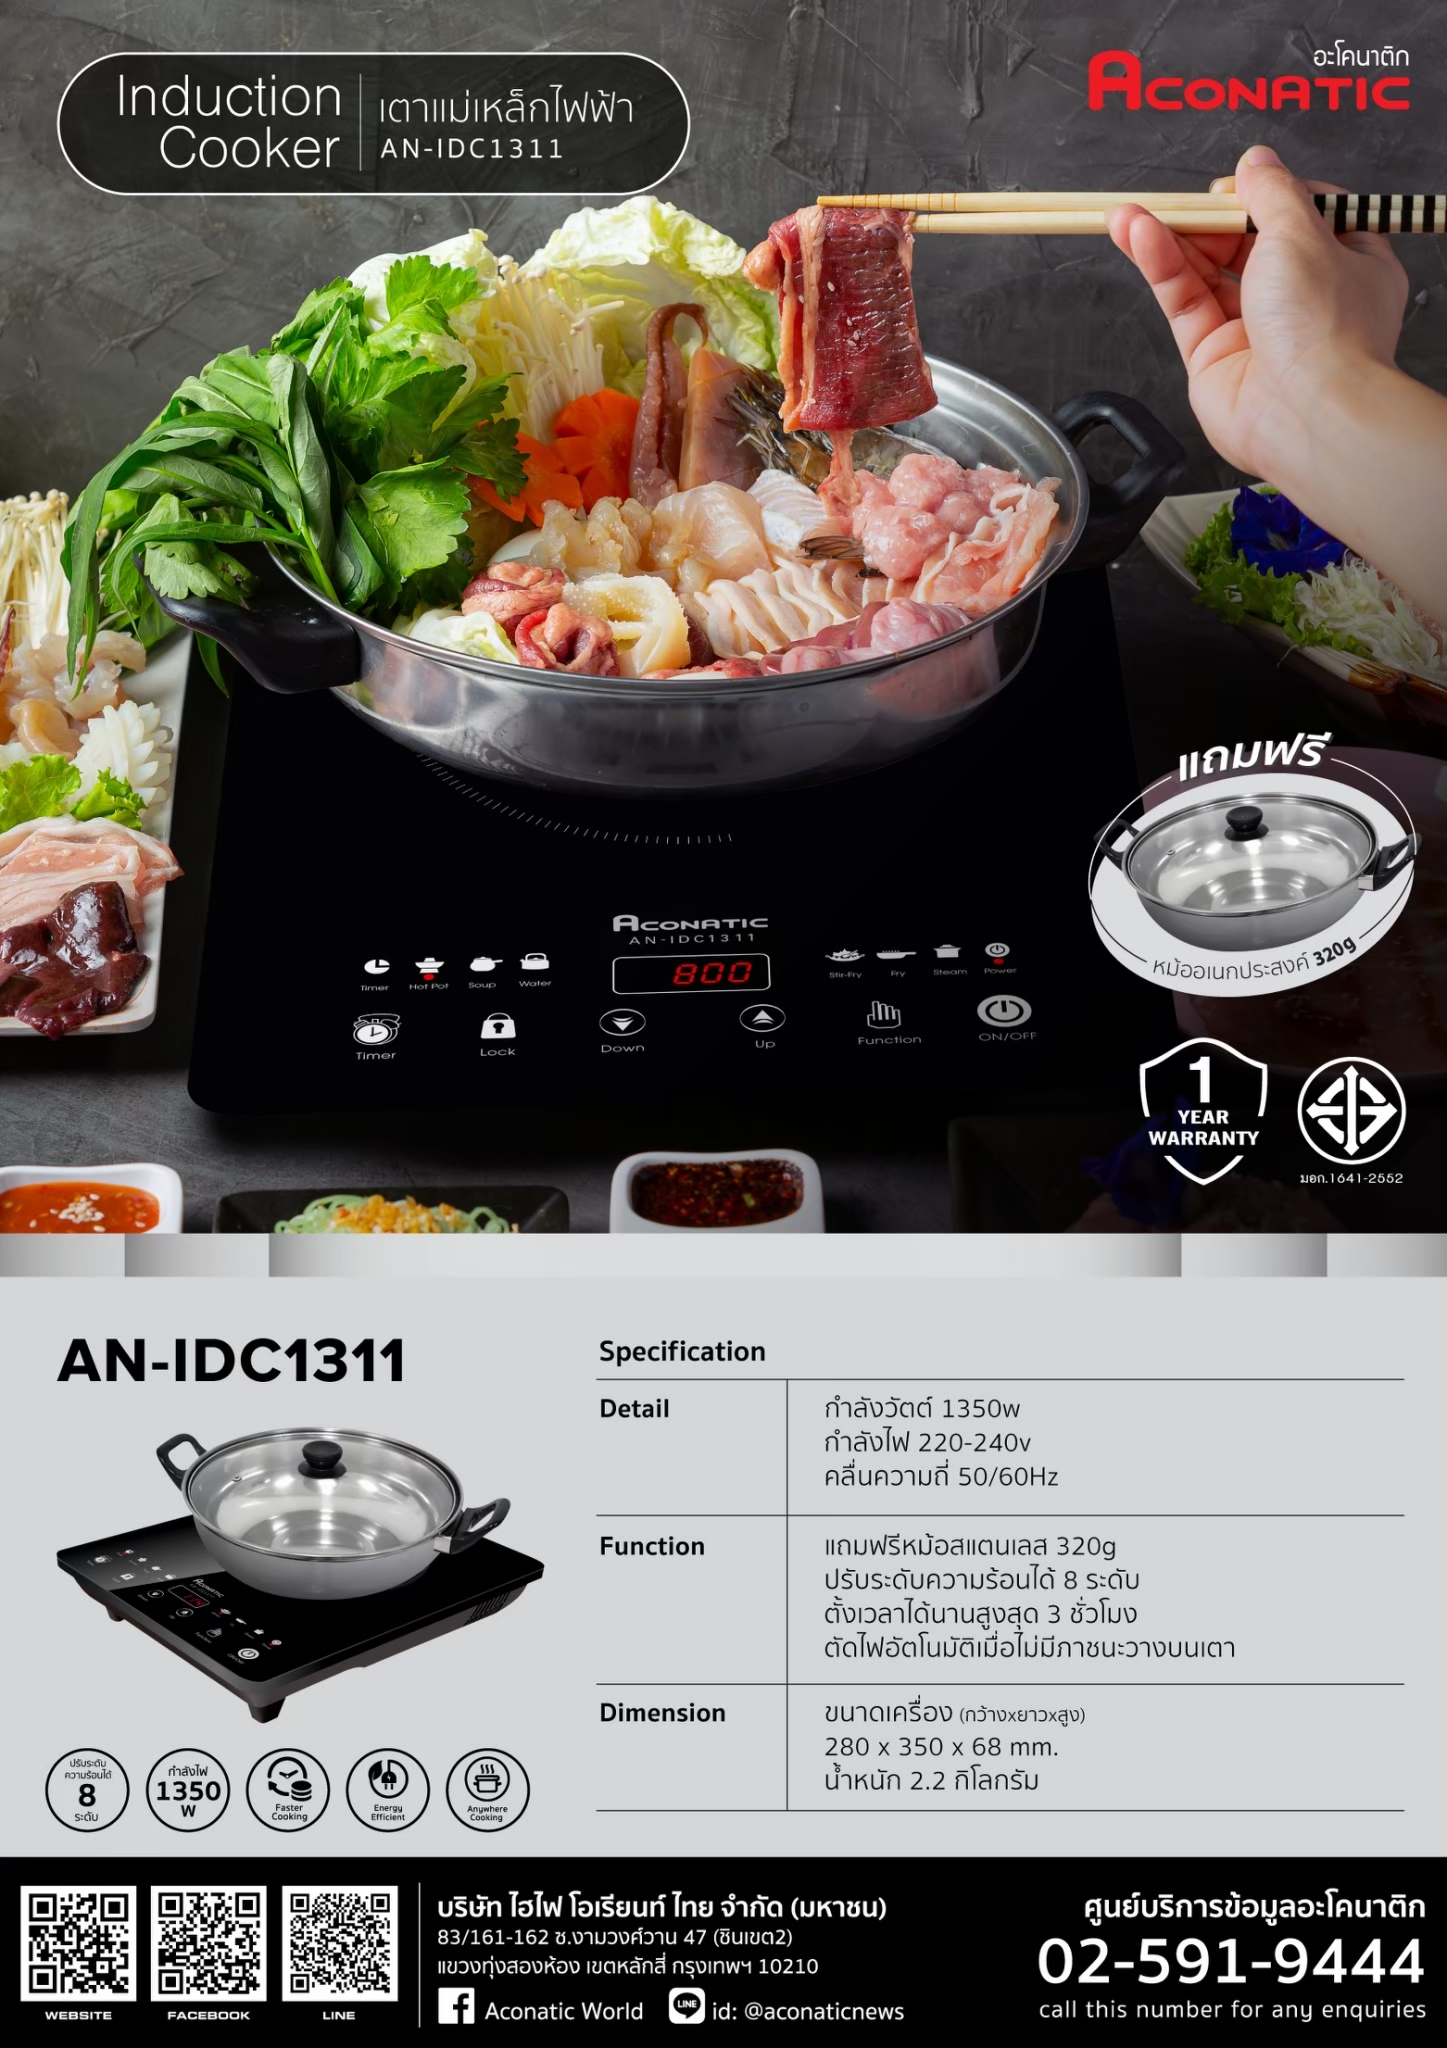 Induction cooker model AN-IDC1311